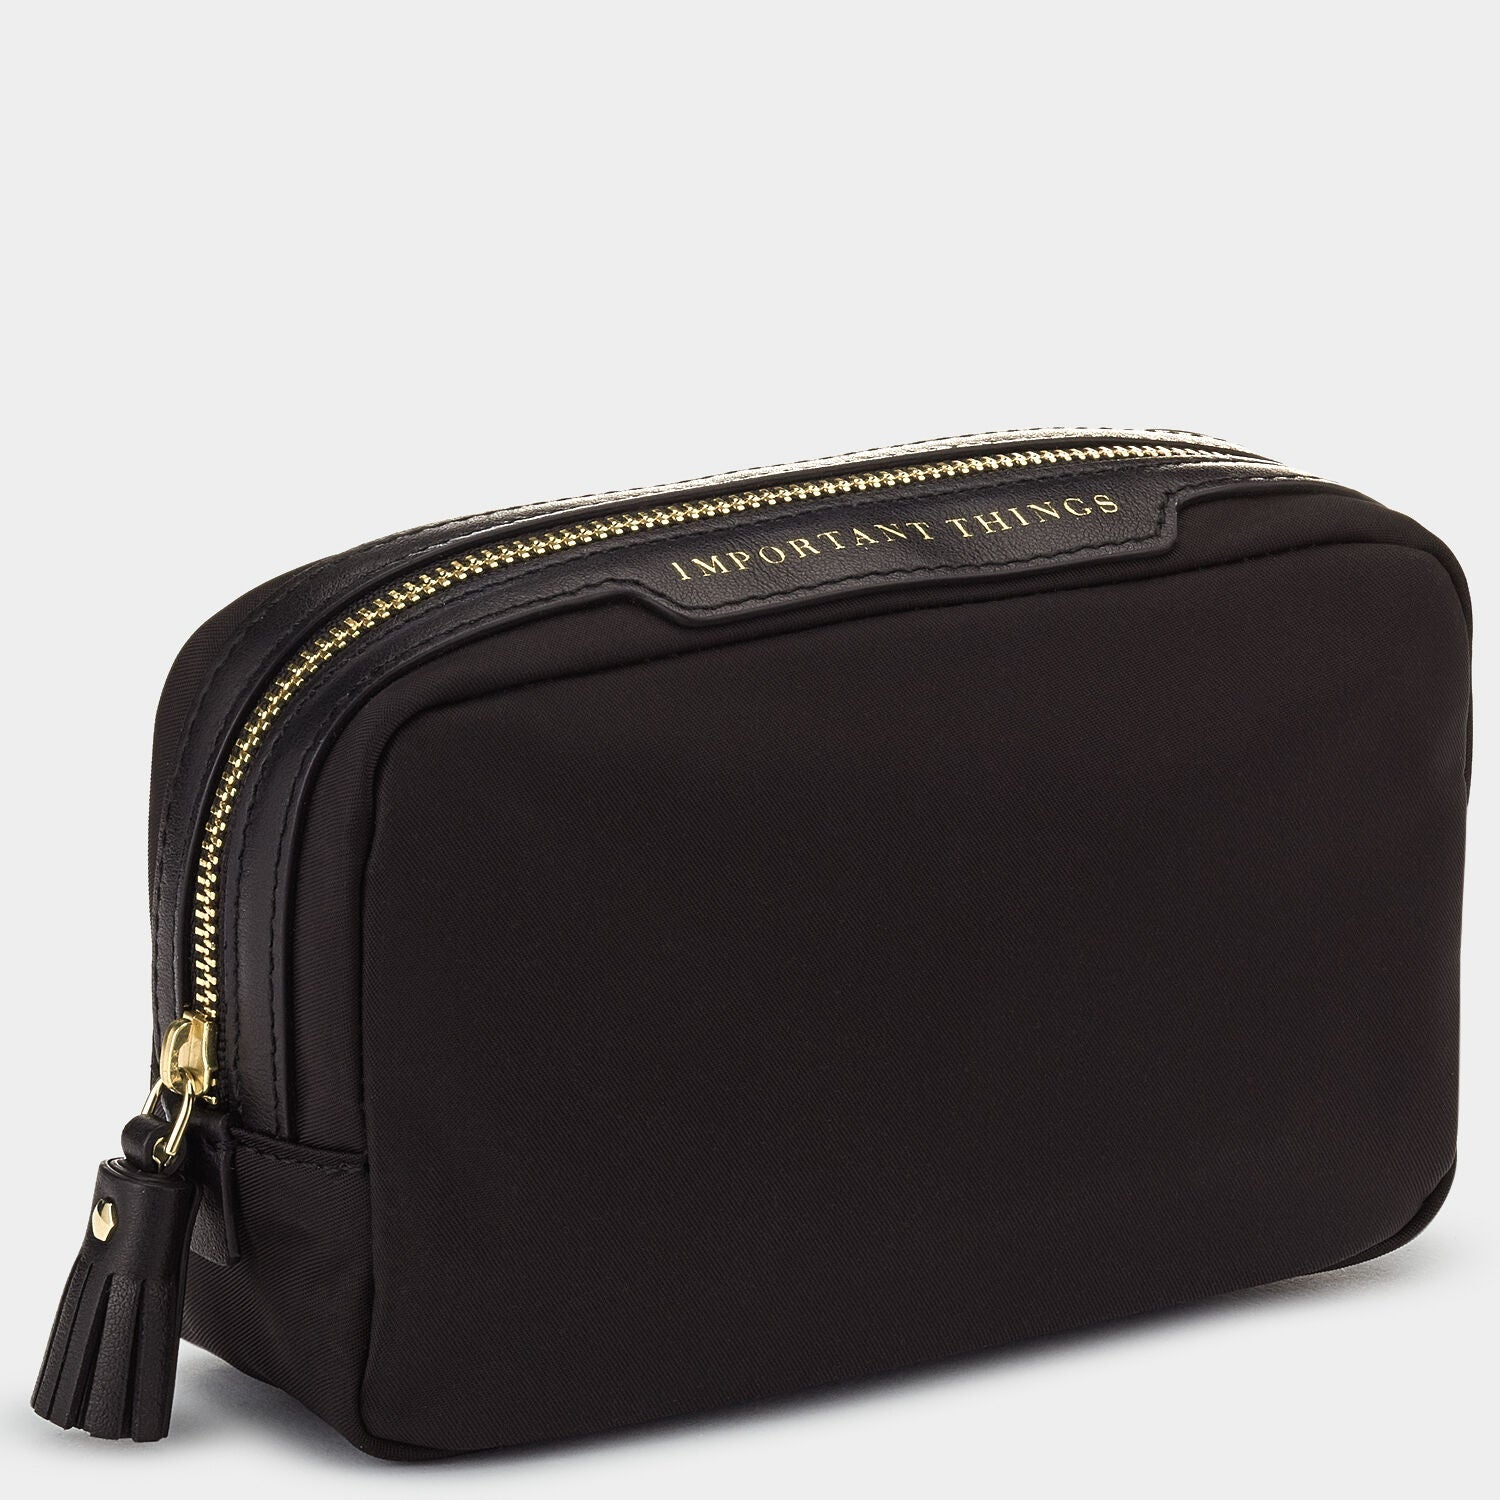 Important Things Pouch -

                  
                    Econyl® Regenerated Nylon in Black -
                  

                  Anya Hindmarch US
